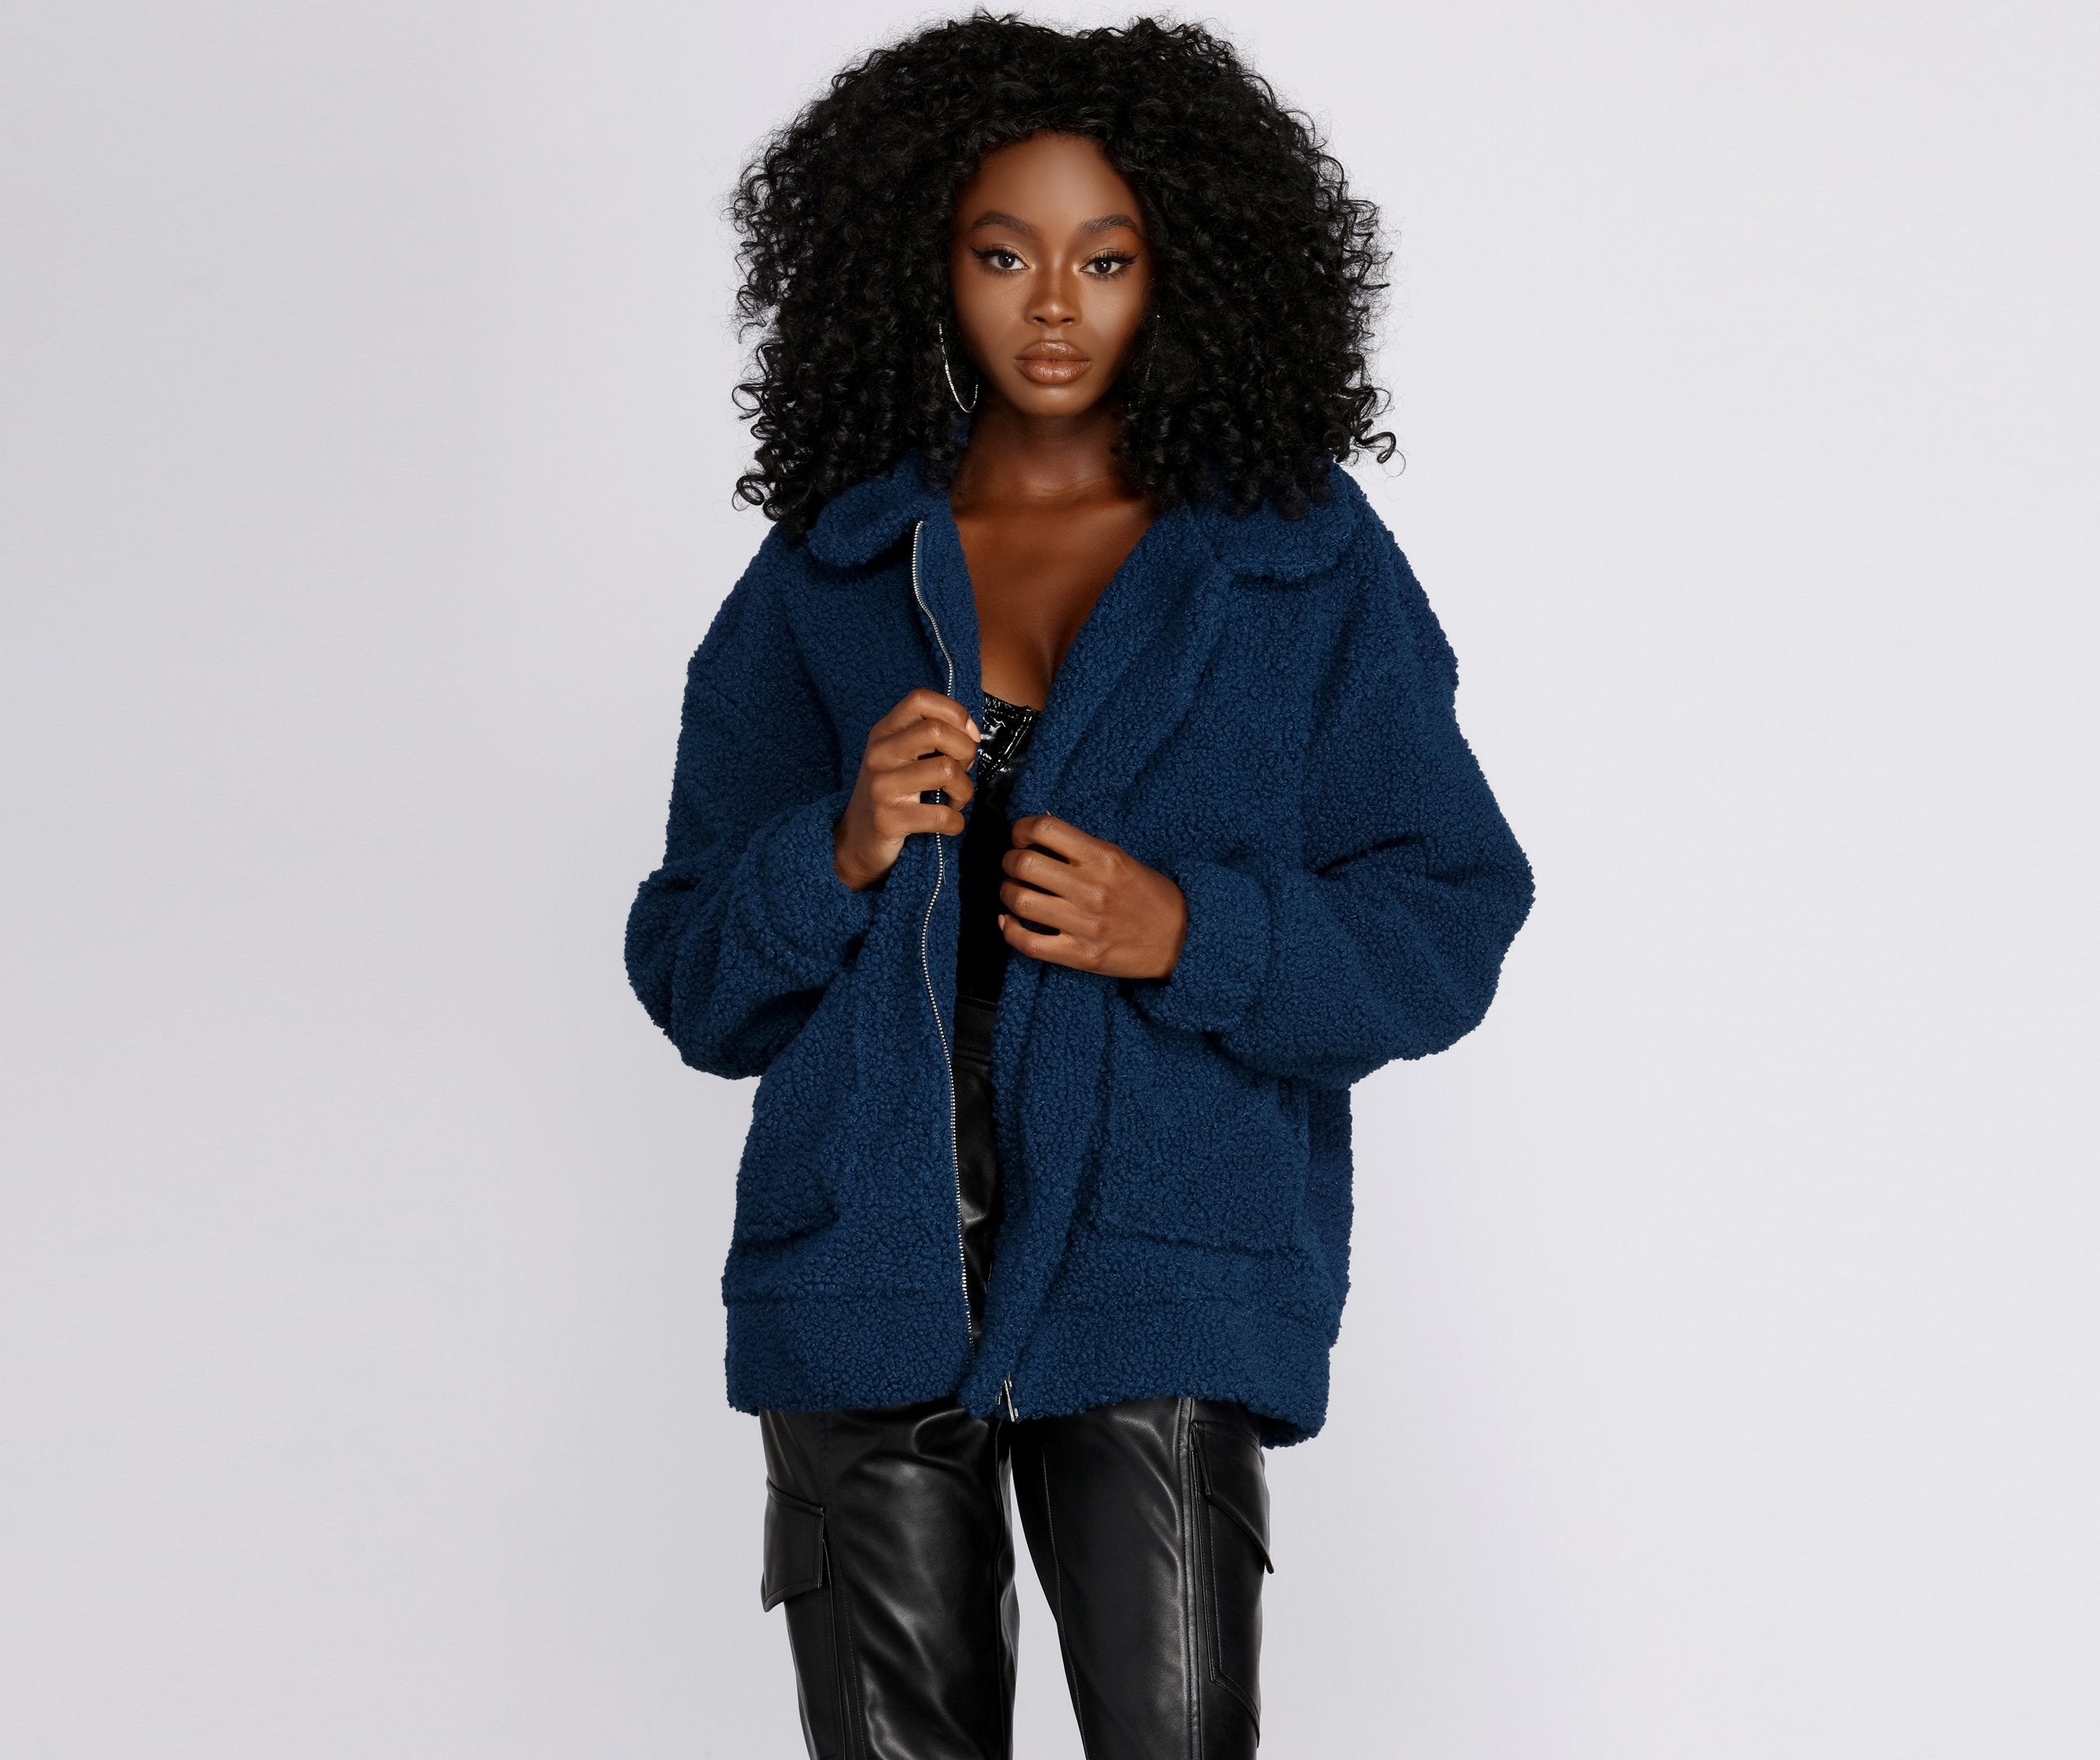 Oversized Teddy Jacket - Lady Occasions